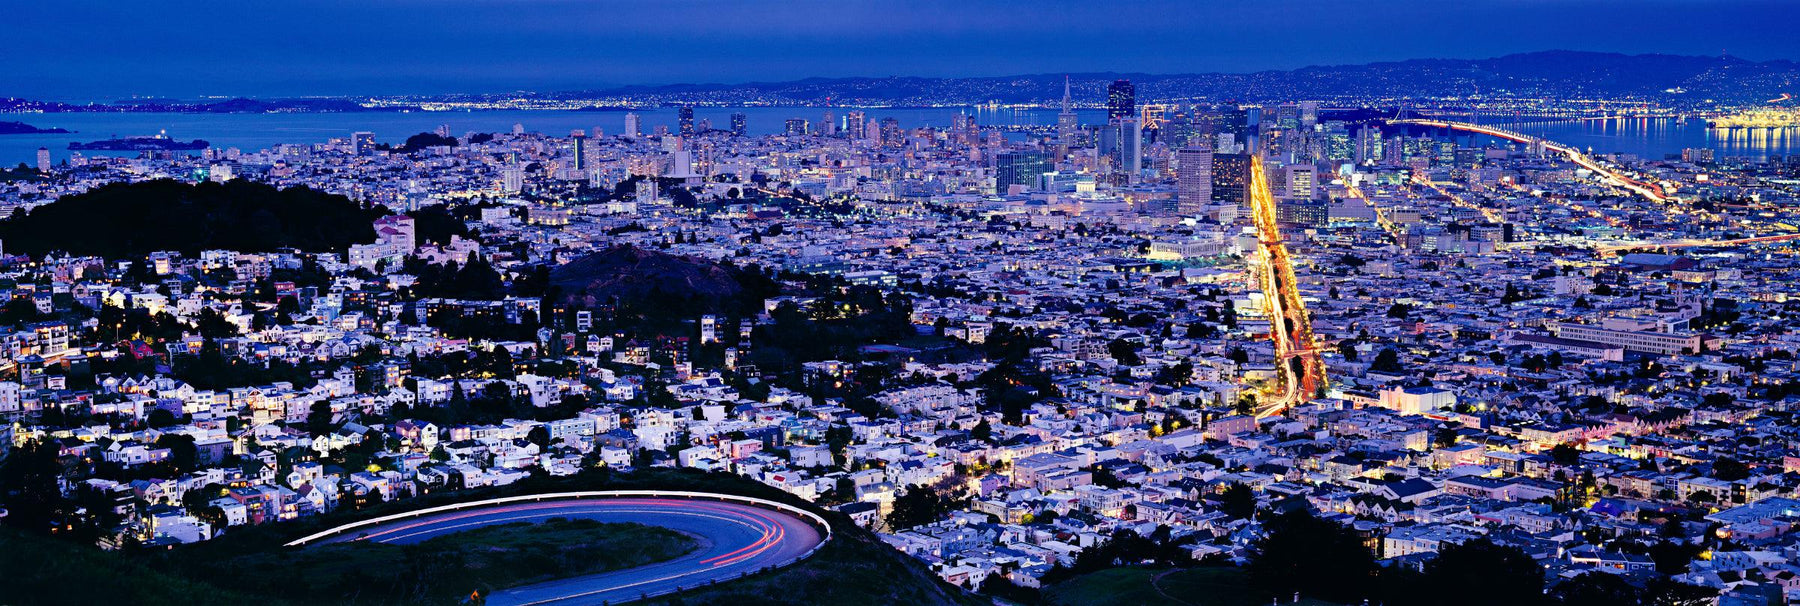 View from the hillside looking down at the lit up traffic and city of San Francisco at night